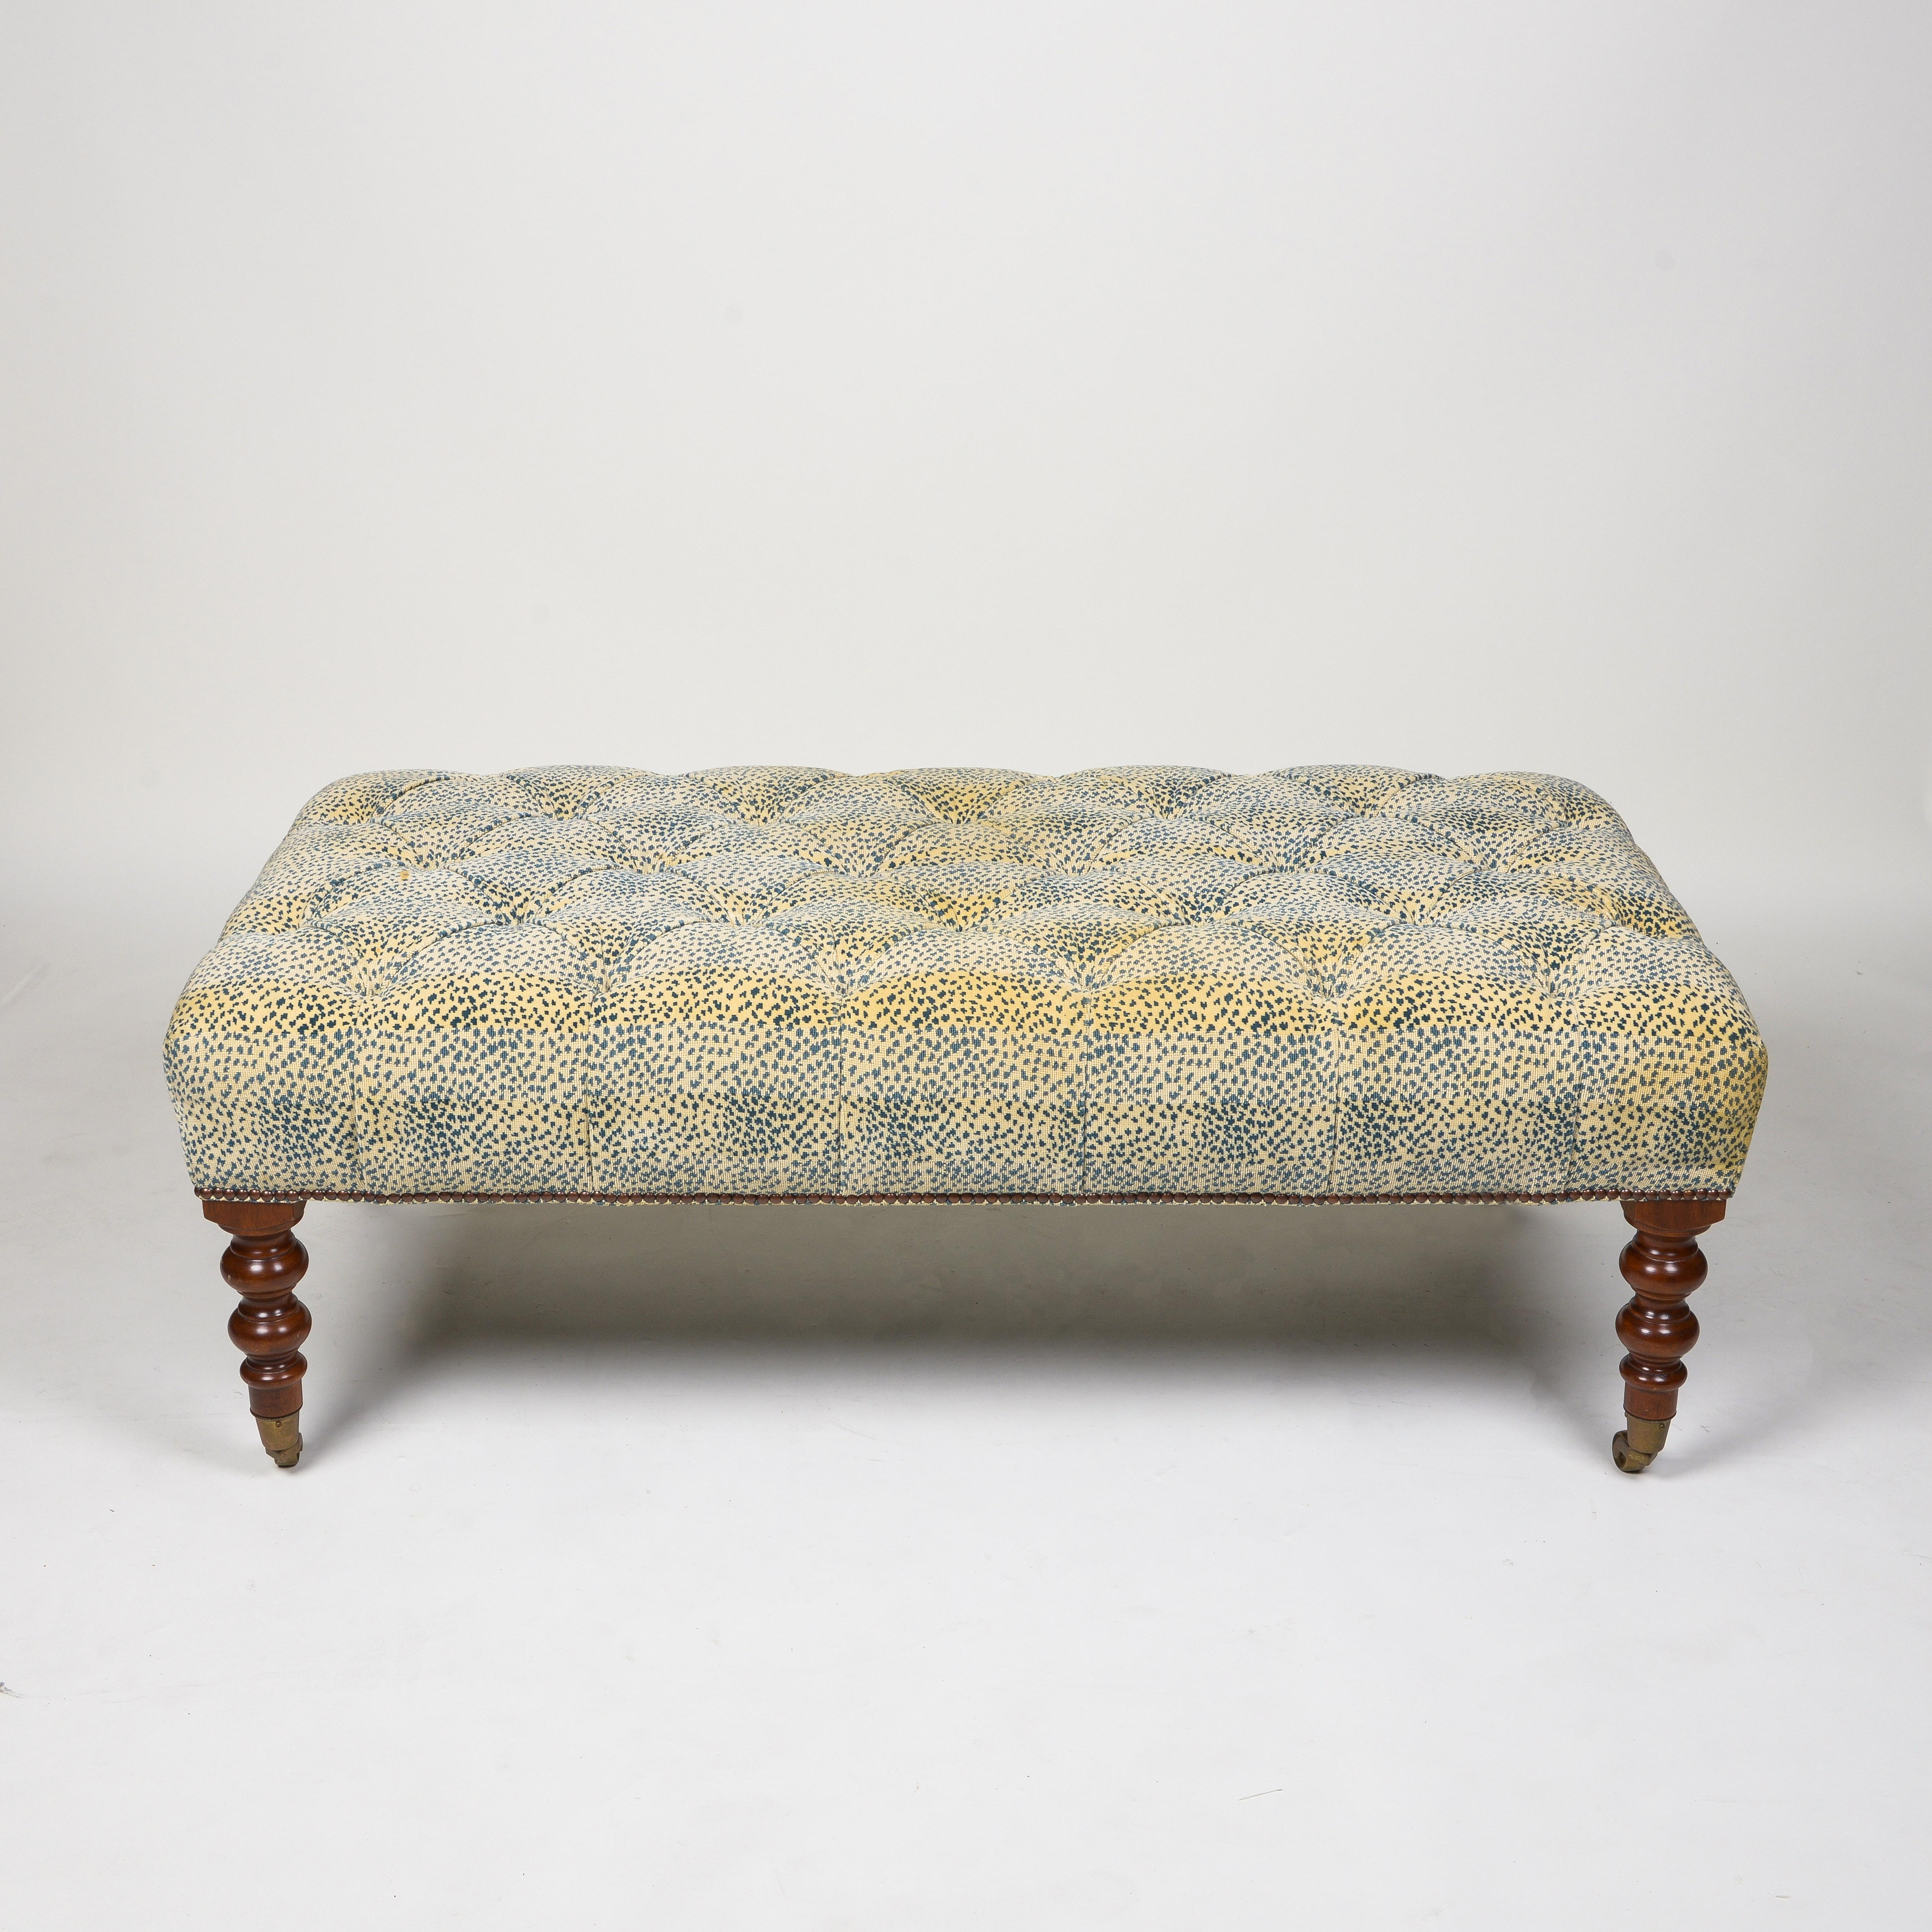 Upholstered in creamy yellow chenille with cobalt spots, tufted and accented around the base with brass nailheads; raised on turned legs terminating in brass caps and casters.